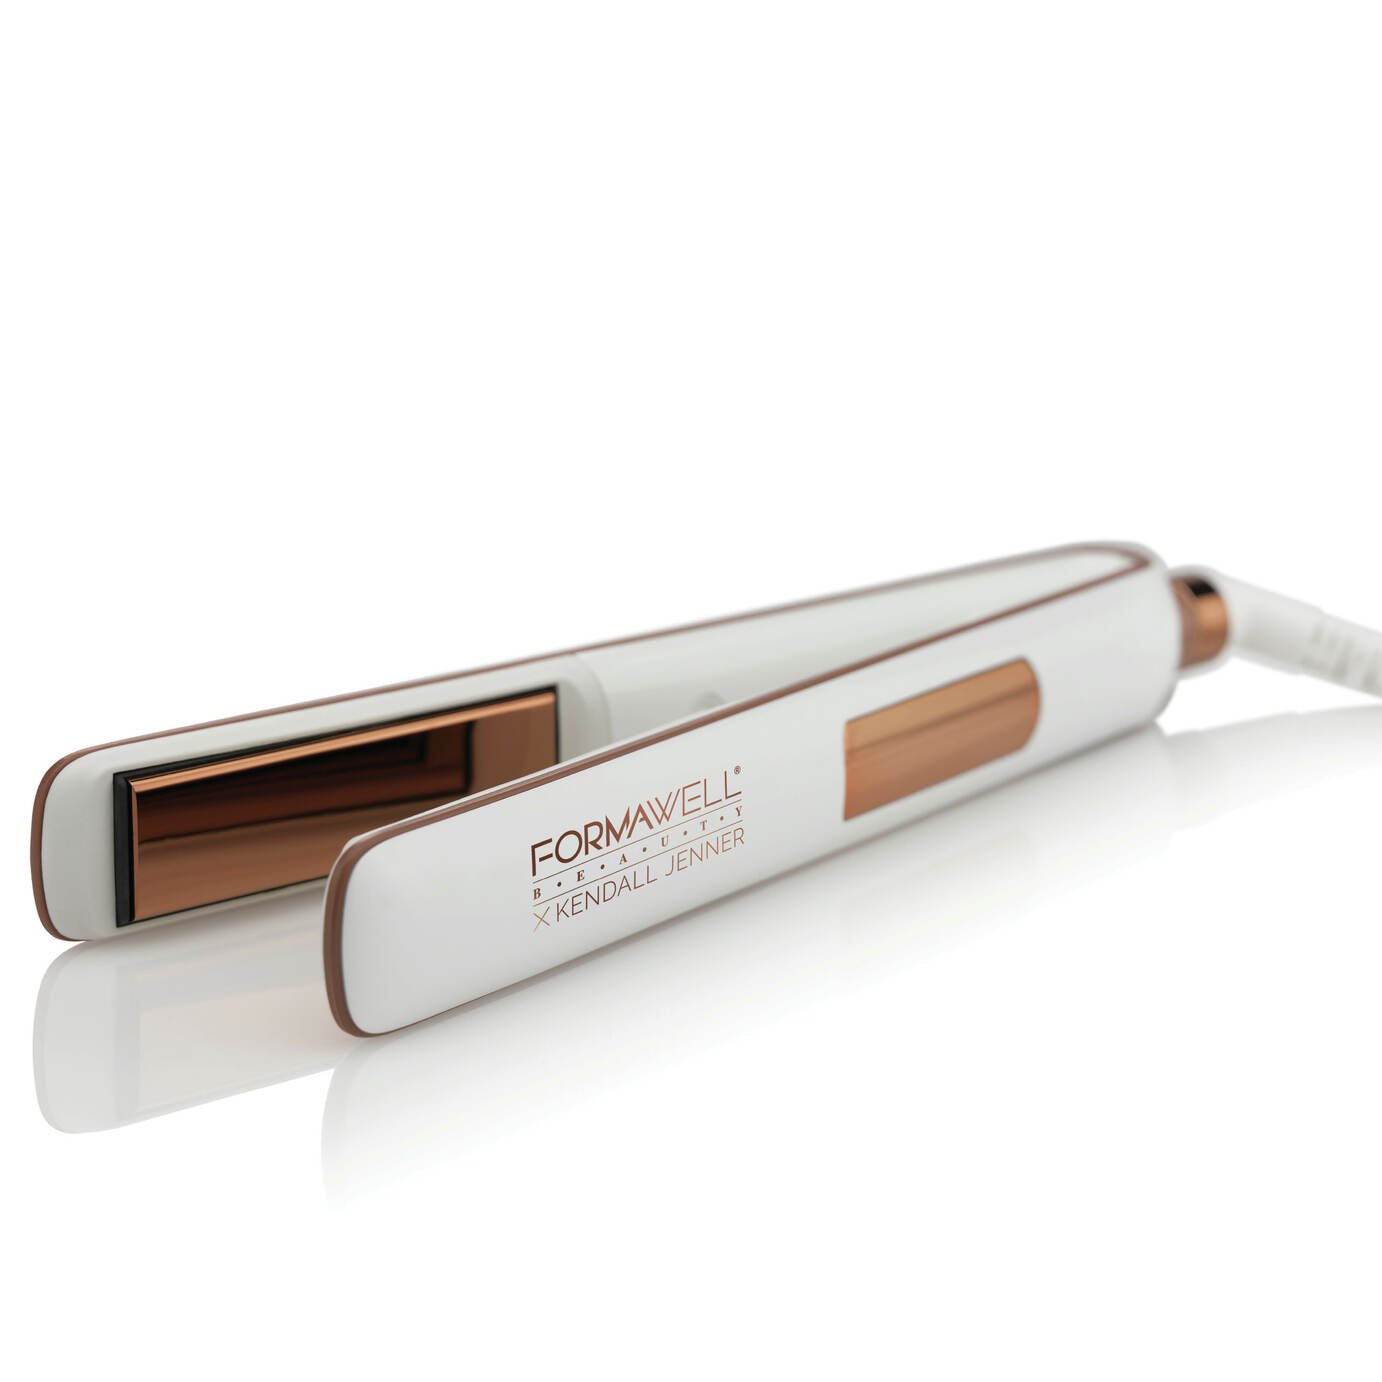 Formawell X Kendall Jenner Gold Pro Hair Straightener